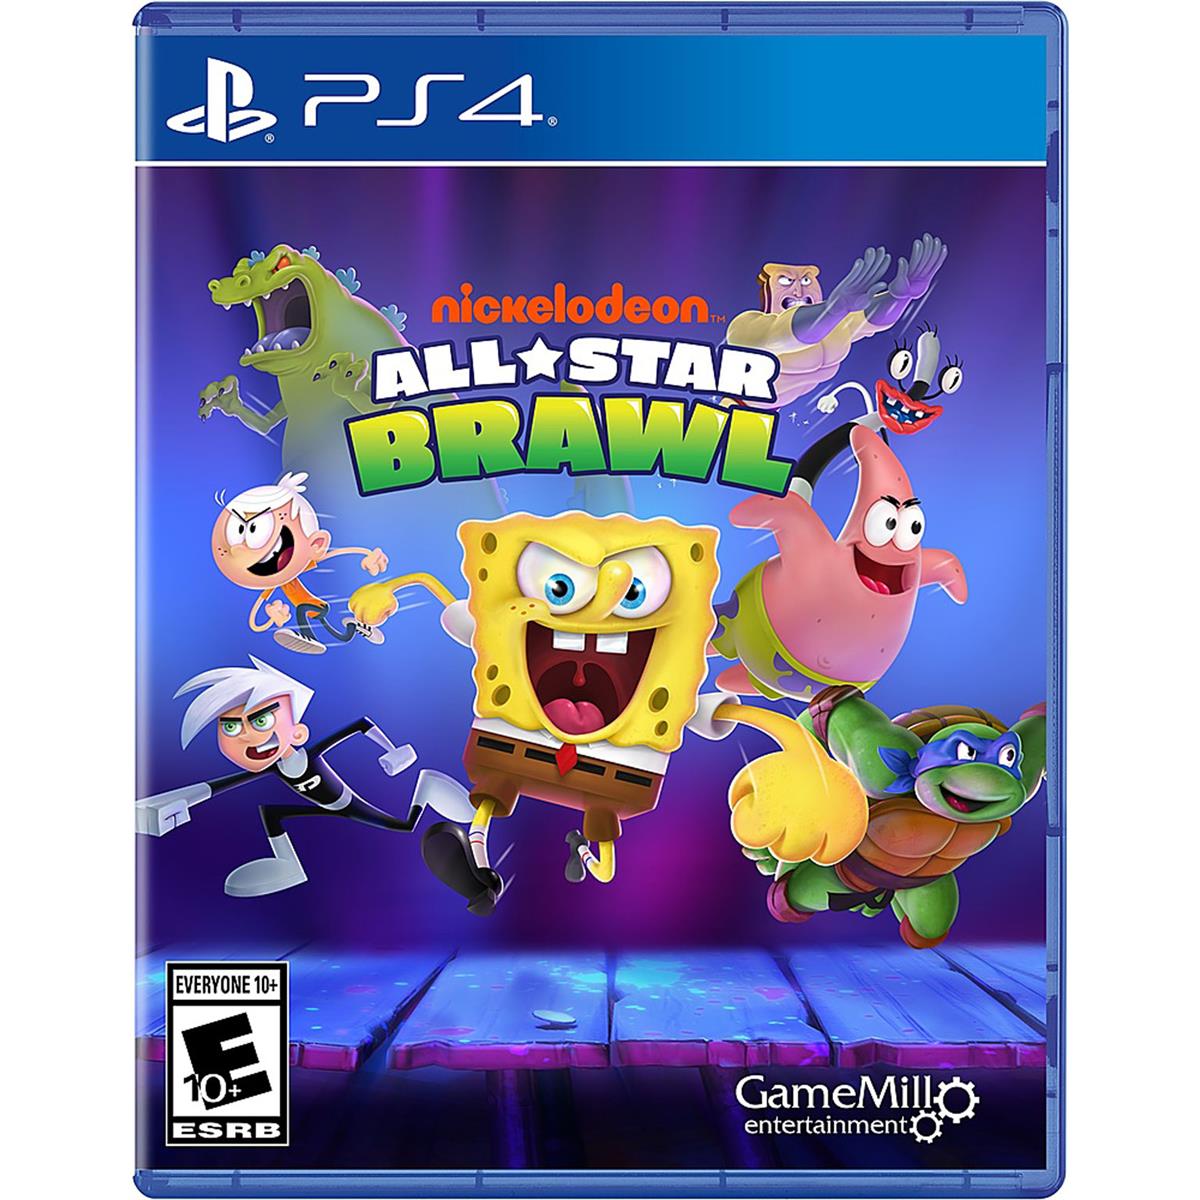 Image of Gamemill Nickelodeon All Star Brawl for PlayStation 4